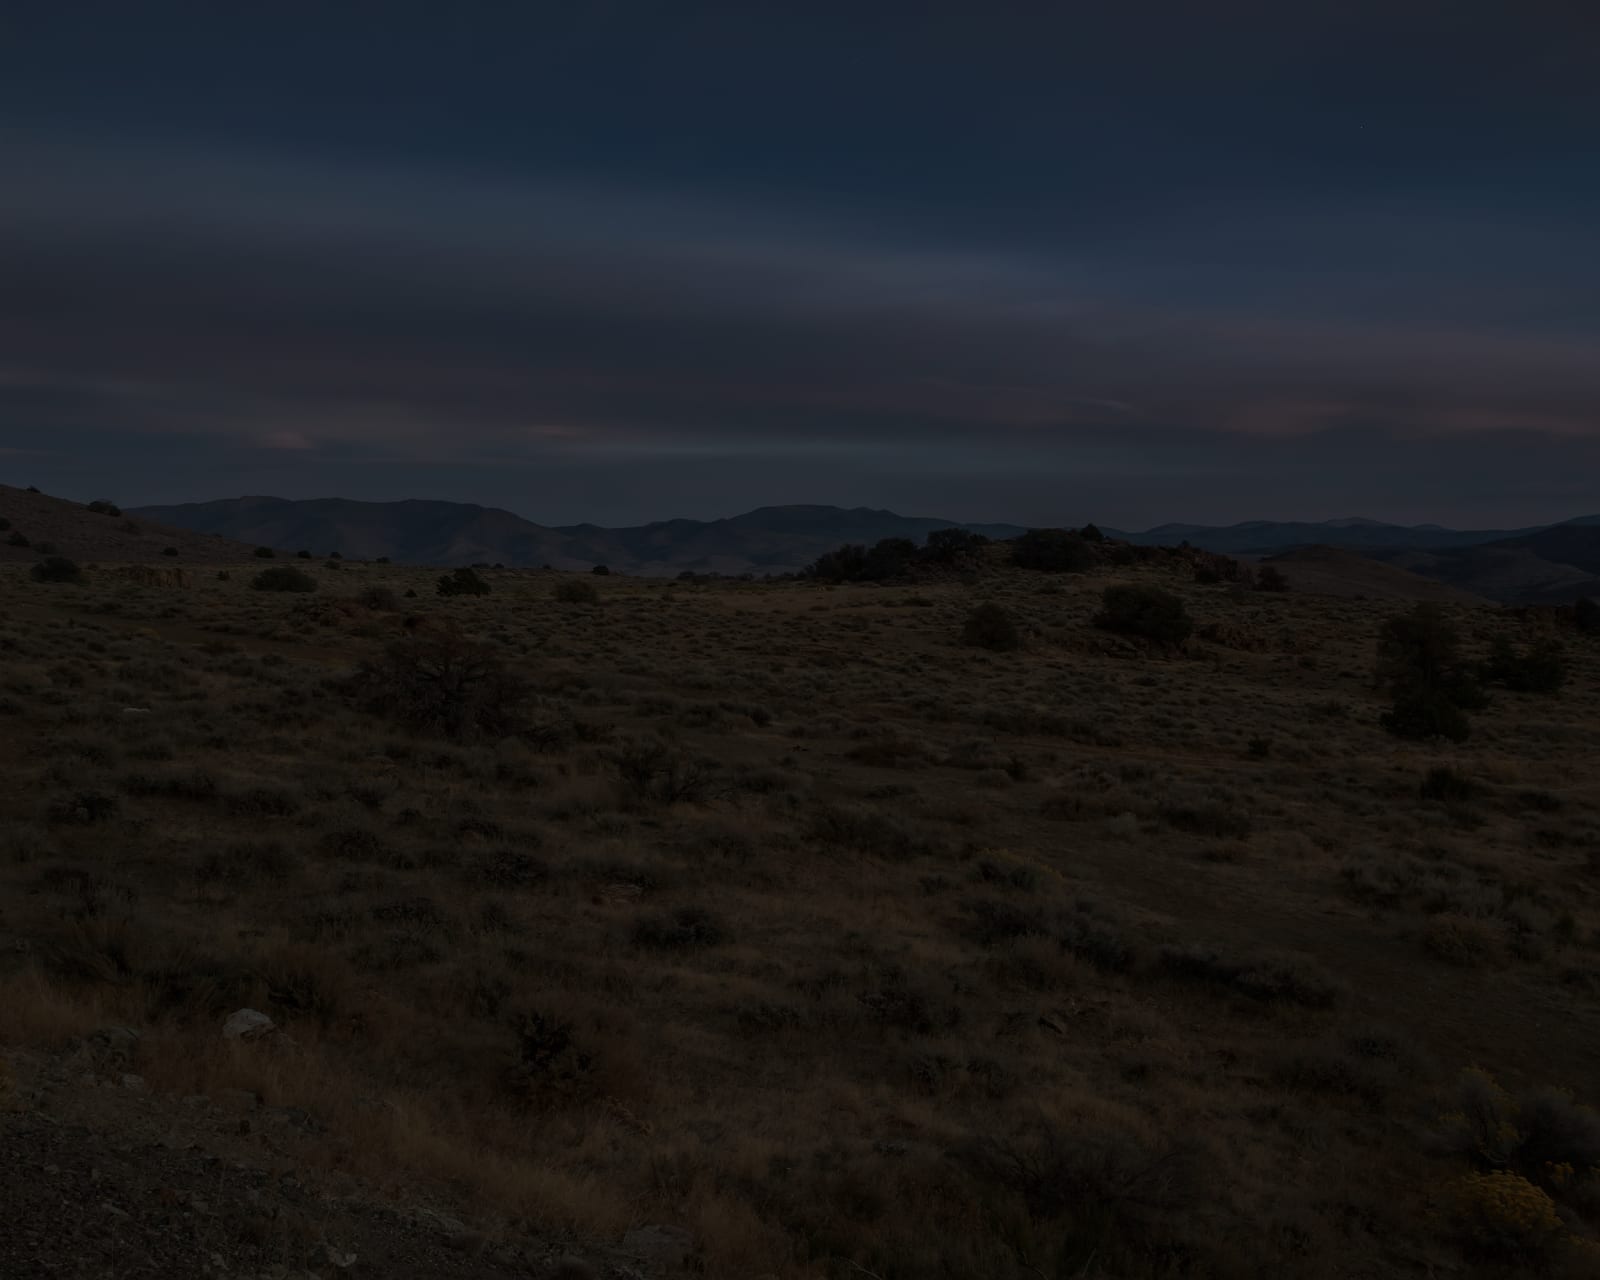 Jeanine Michna-Bales, Back Down the Mountain at 1 a.m. Outside of Carson City, Nevada, 2018